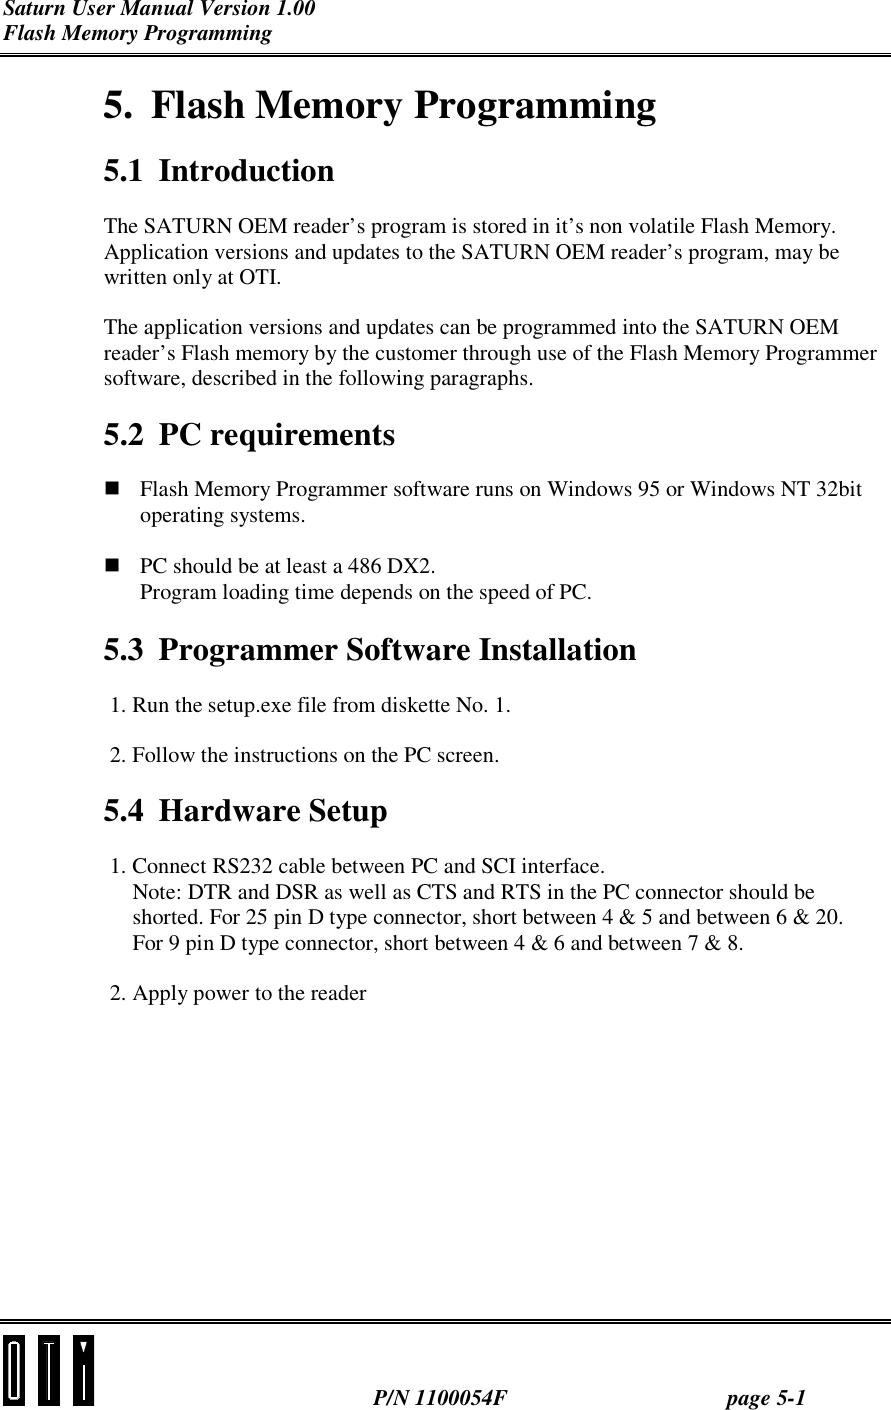 Saturn User Manual Version 1.00 Flash Memory Programming  P/N 1100054F page 5-1 5. Flash Memory Programming 5.1 Introduction The SATURN OEM reader’s program is stored in it’s non volatile Flash Memory. Application versions and updates to the SATURN OEM reader’s program, may be written only at OTI. The application versions and updates can be programmed into the SATURN OEM reader’s Flash memory by the customer through use of the Flash Memory Programmer software, described in the following paragraphs. 5.2 PC requirements ! Flash Memory Programmer software runs on Windows 95 or Windows NT 32bit operating systems.  ! PC should be at least a 486 DX2. Program loading time depends on the speed of PC.  5.3  Programmer Software Installation 1. Run the setup.exe file from diskette No. 1. 2. Follow the instructions on the PC screen. 5.4 Hardware Setup 1. Connect RS232 cable between PC and SCI interface. Note: DTR and DSR as well as CTS and RTS in the PC connector should be shorted. For 25 pin D type connector, short between 4 &amp; 5 and between 6 &amp; 20. For 9 pin D type connector, short between 4 &amp; 6 and between 7 &amp; 8. 2. Apply power to the reader 